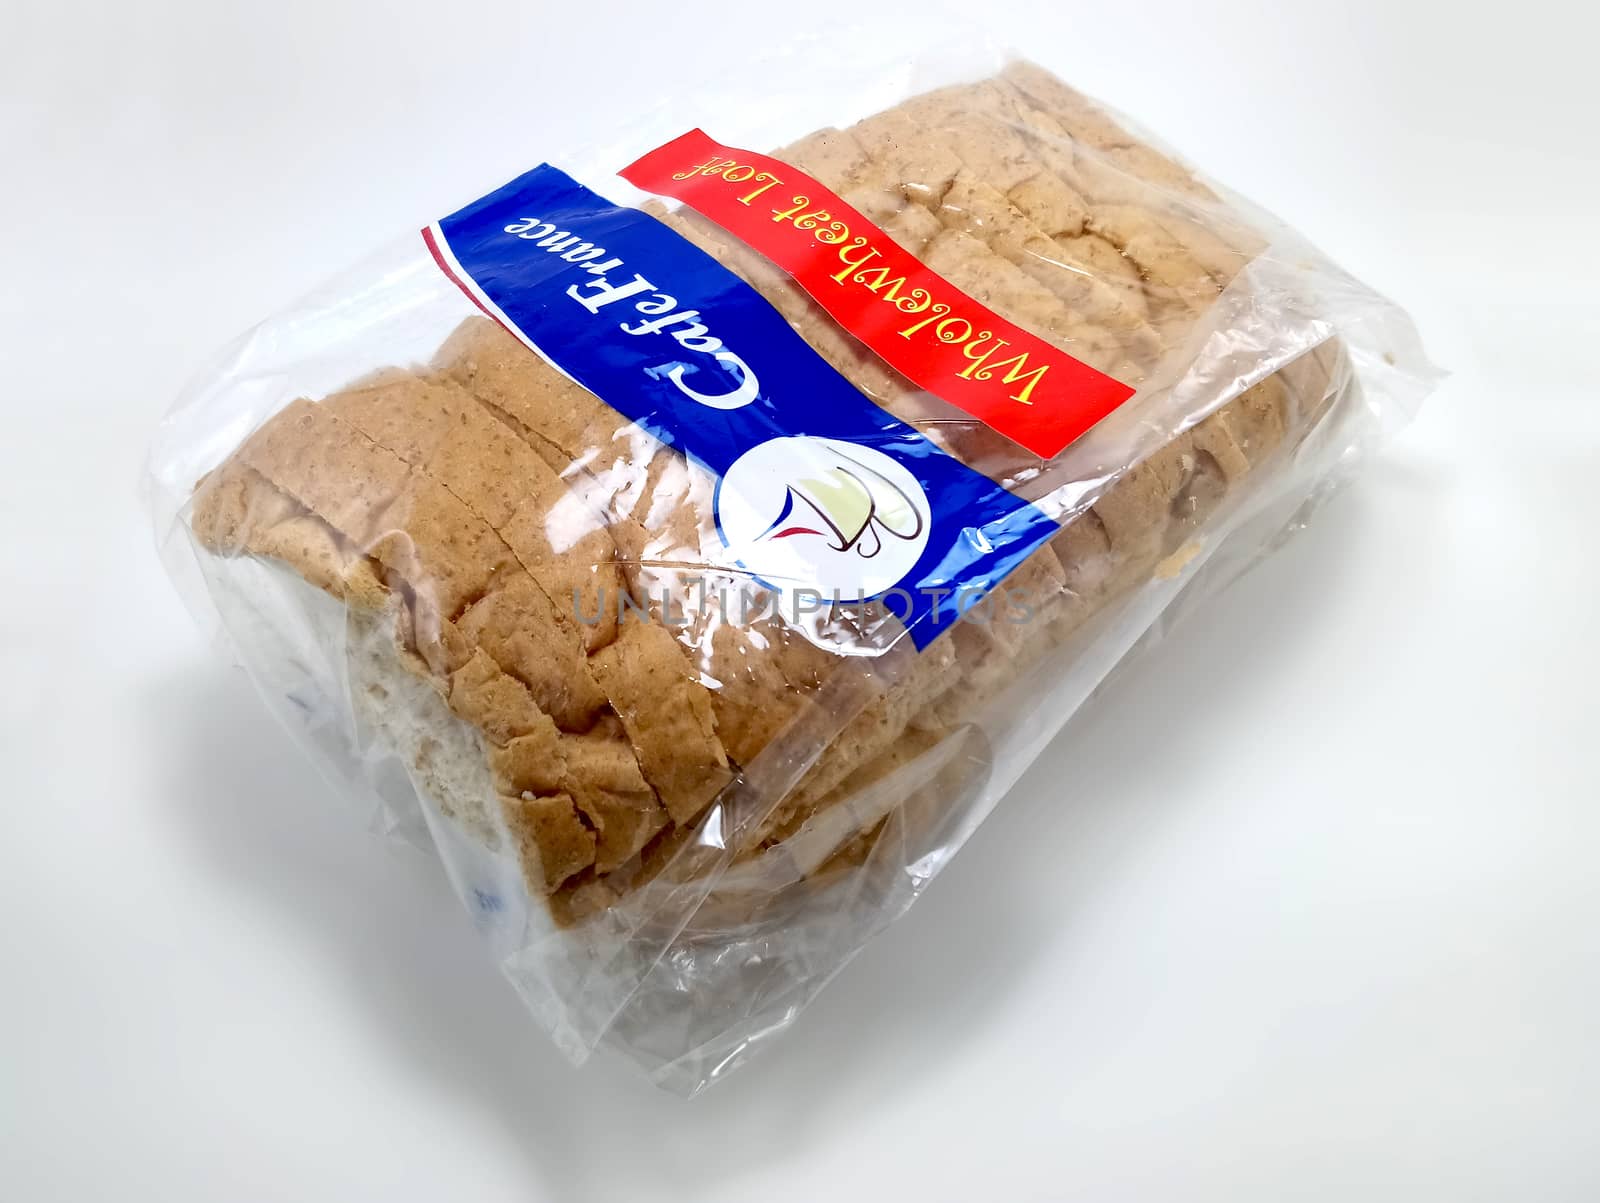 MANILA, PH - JUNE 23 - Cafe France whole wheat bread loaf on June 23, 2020 in Manila, Philippines.